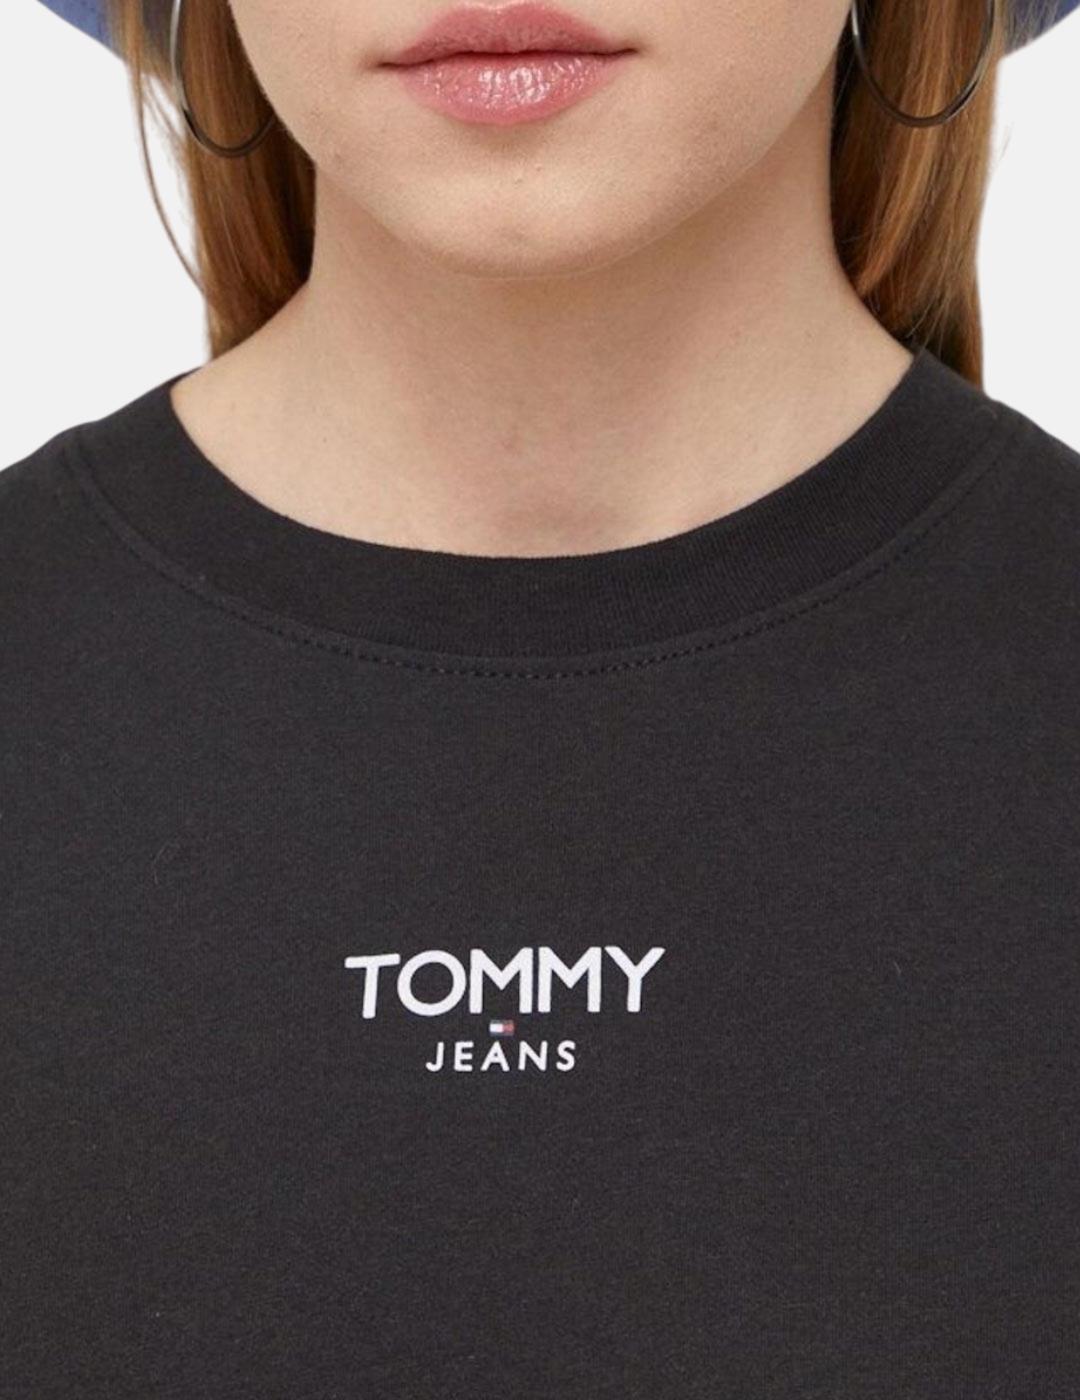 Camiseta Tommy Jeans para Chica